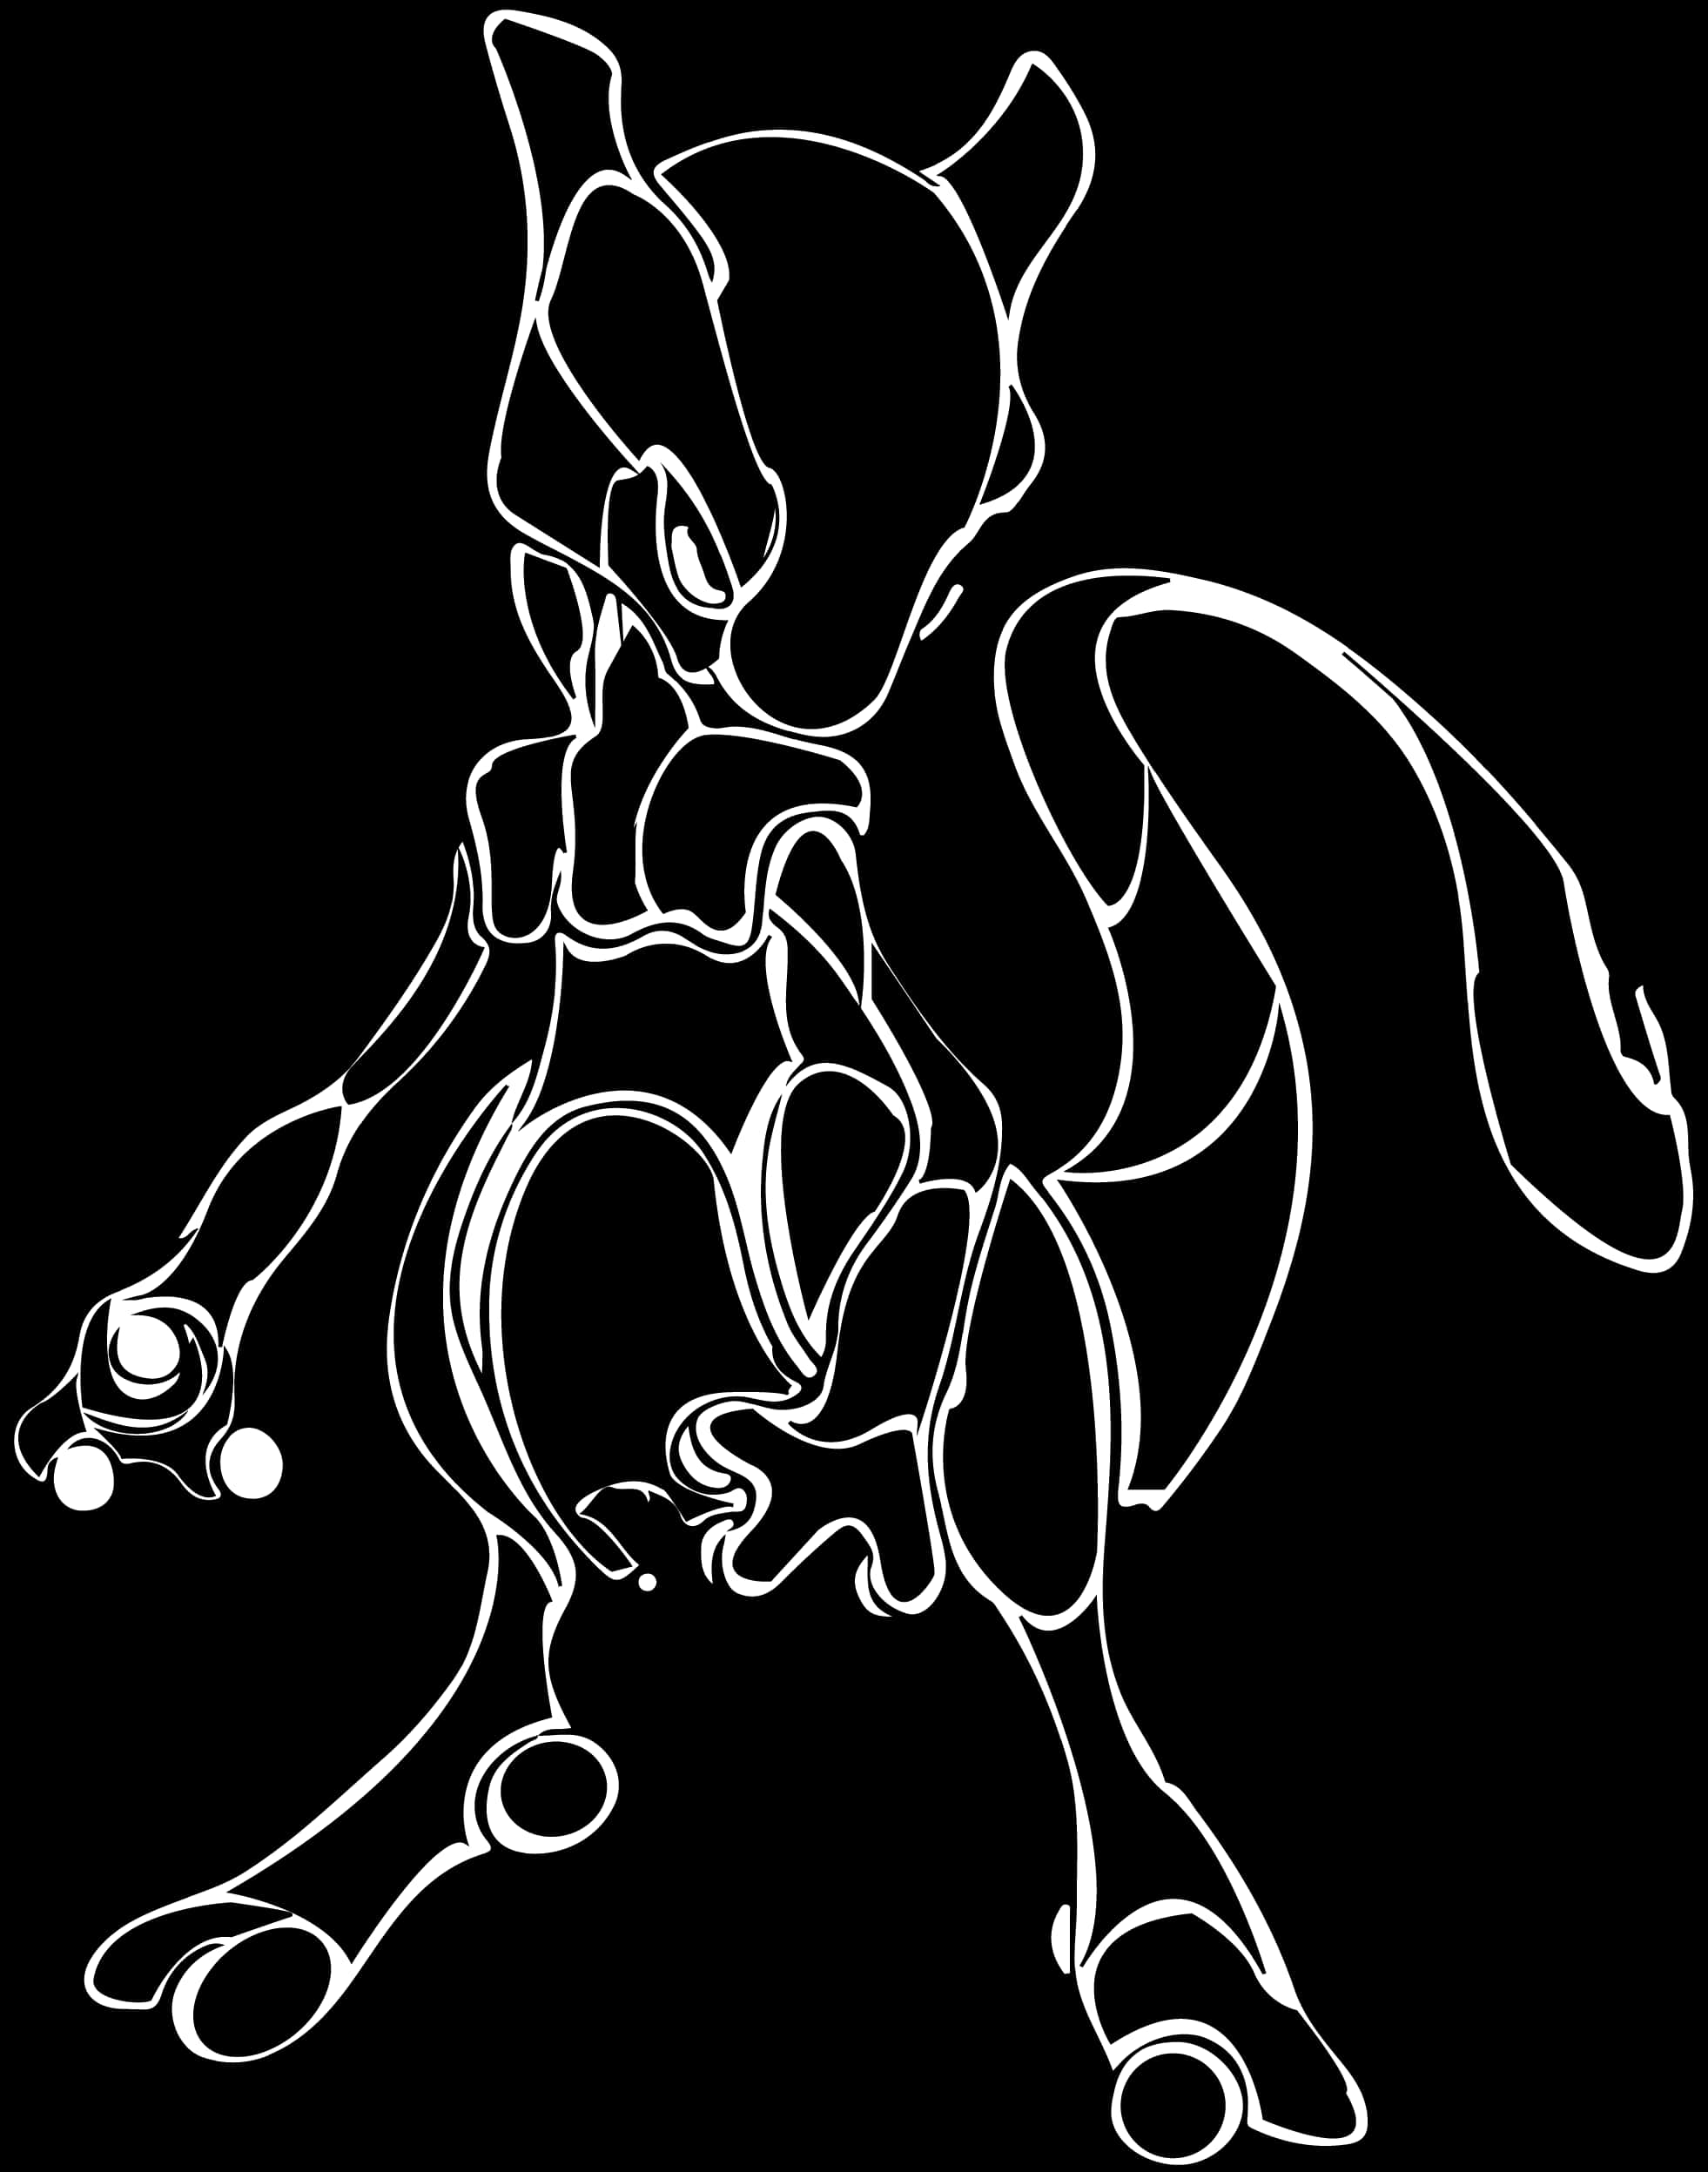 Mewtwo Outline Art PNG image